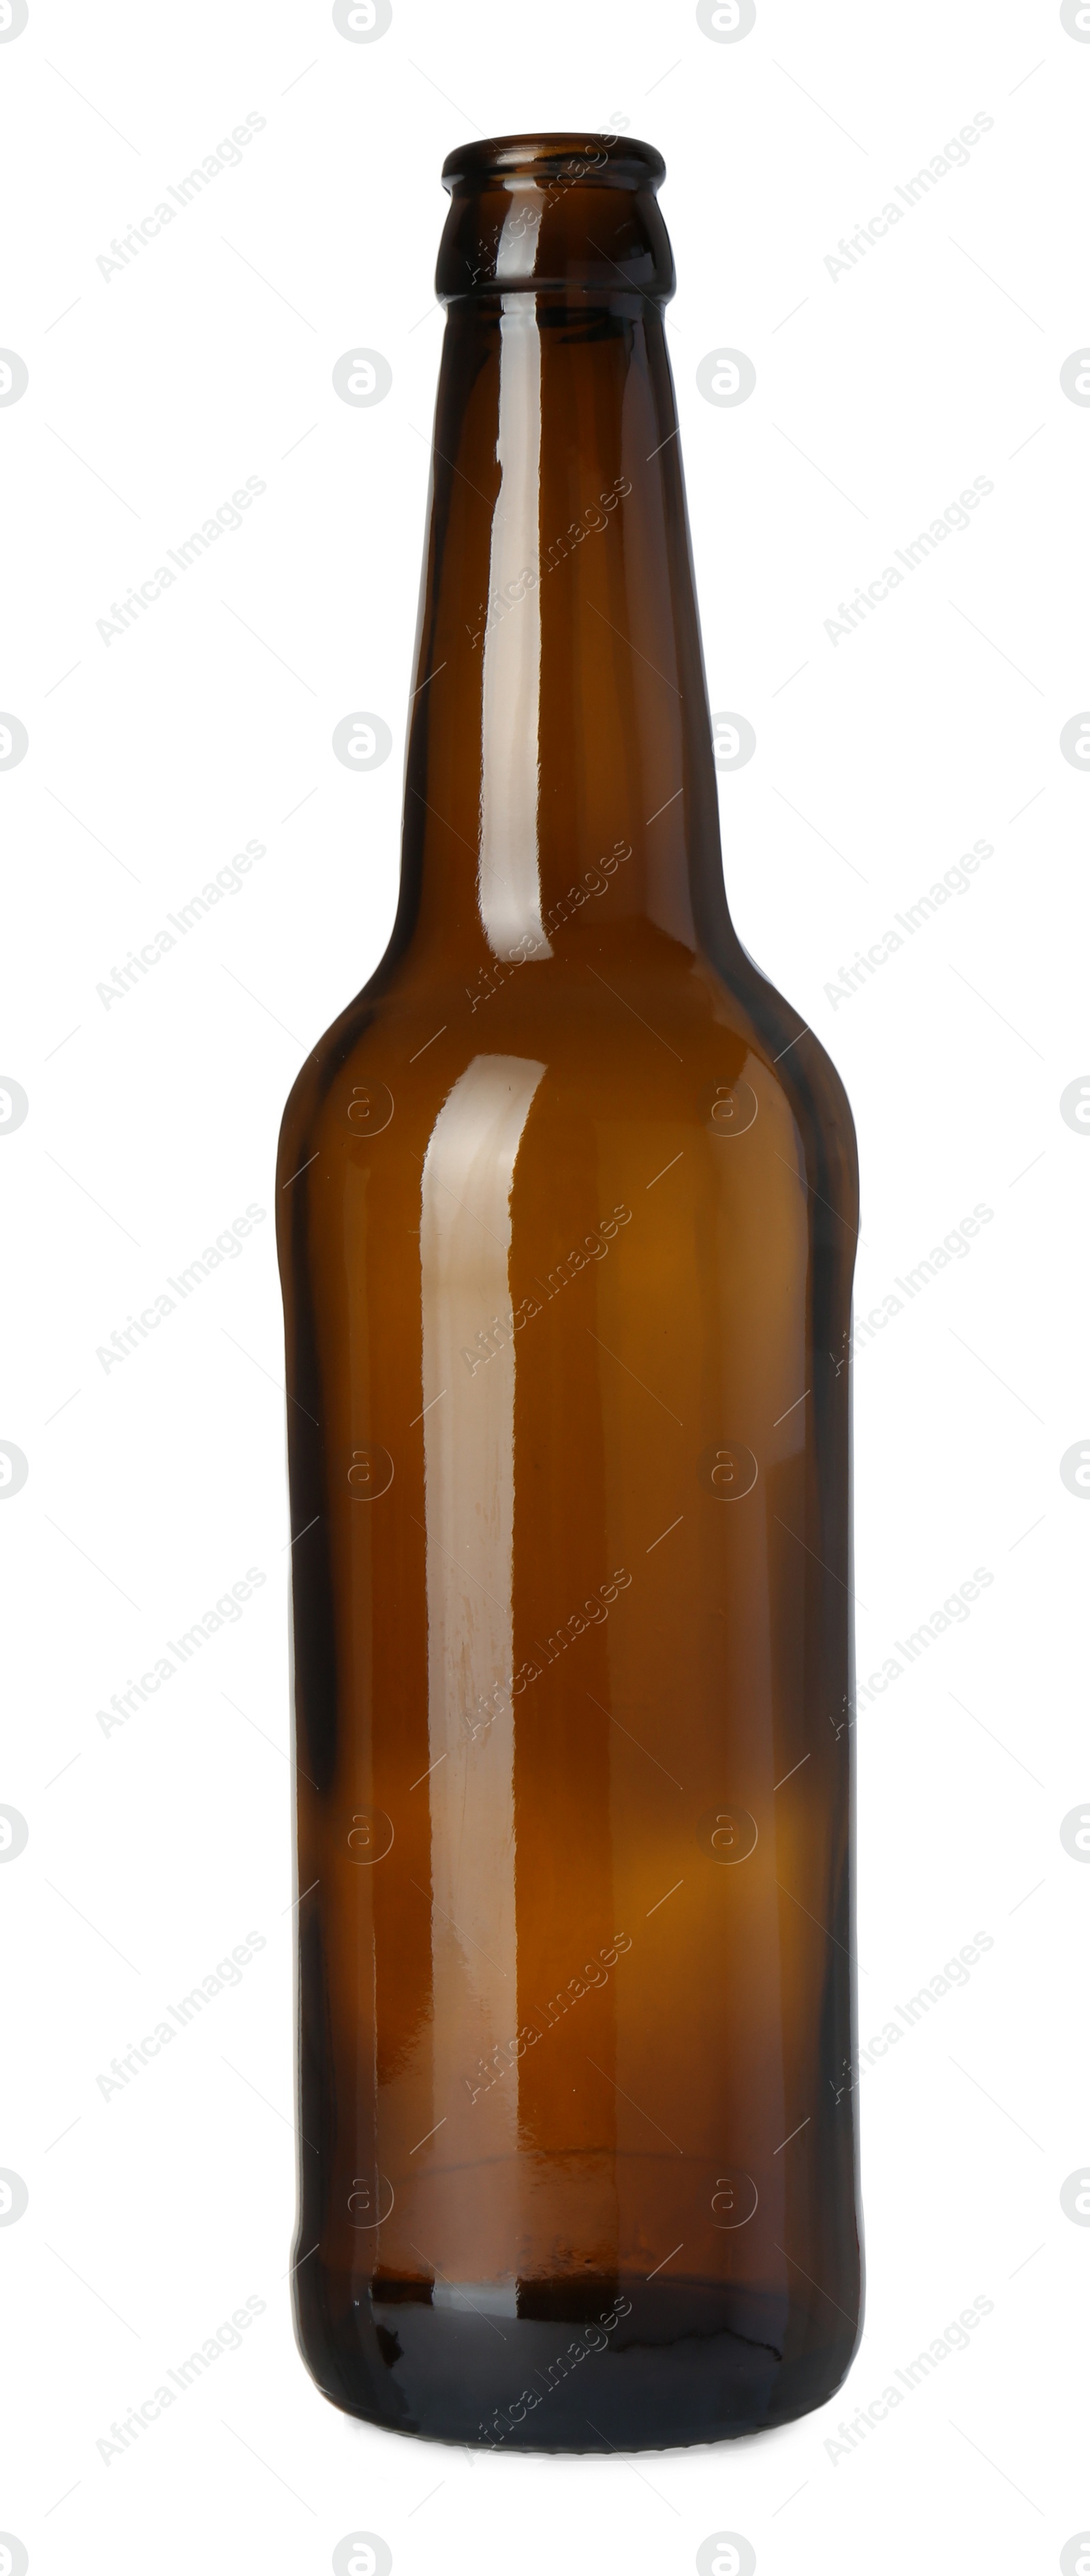 Photo of Empty brown glass bottle isolated on white